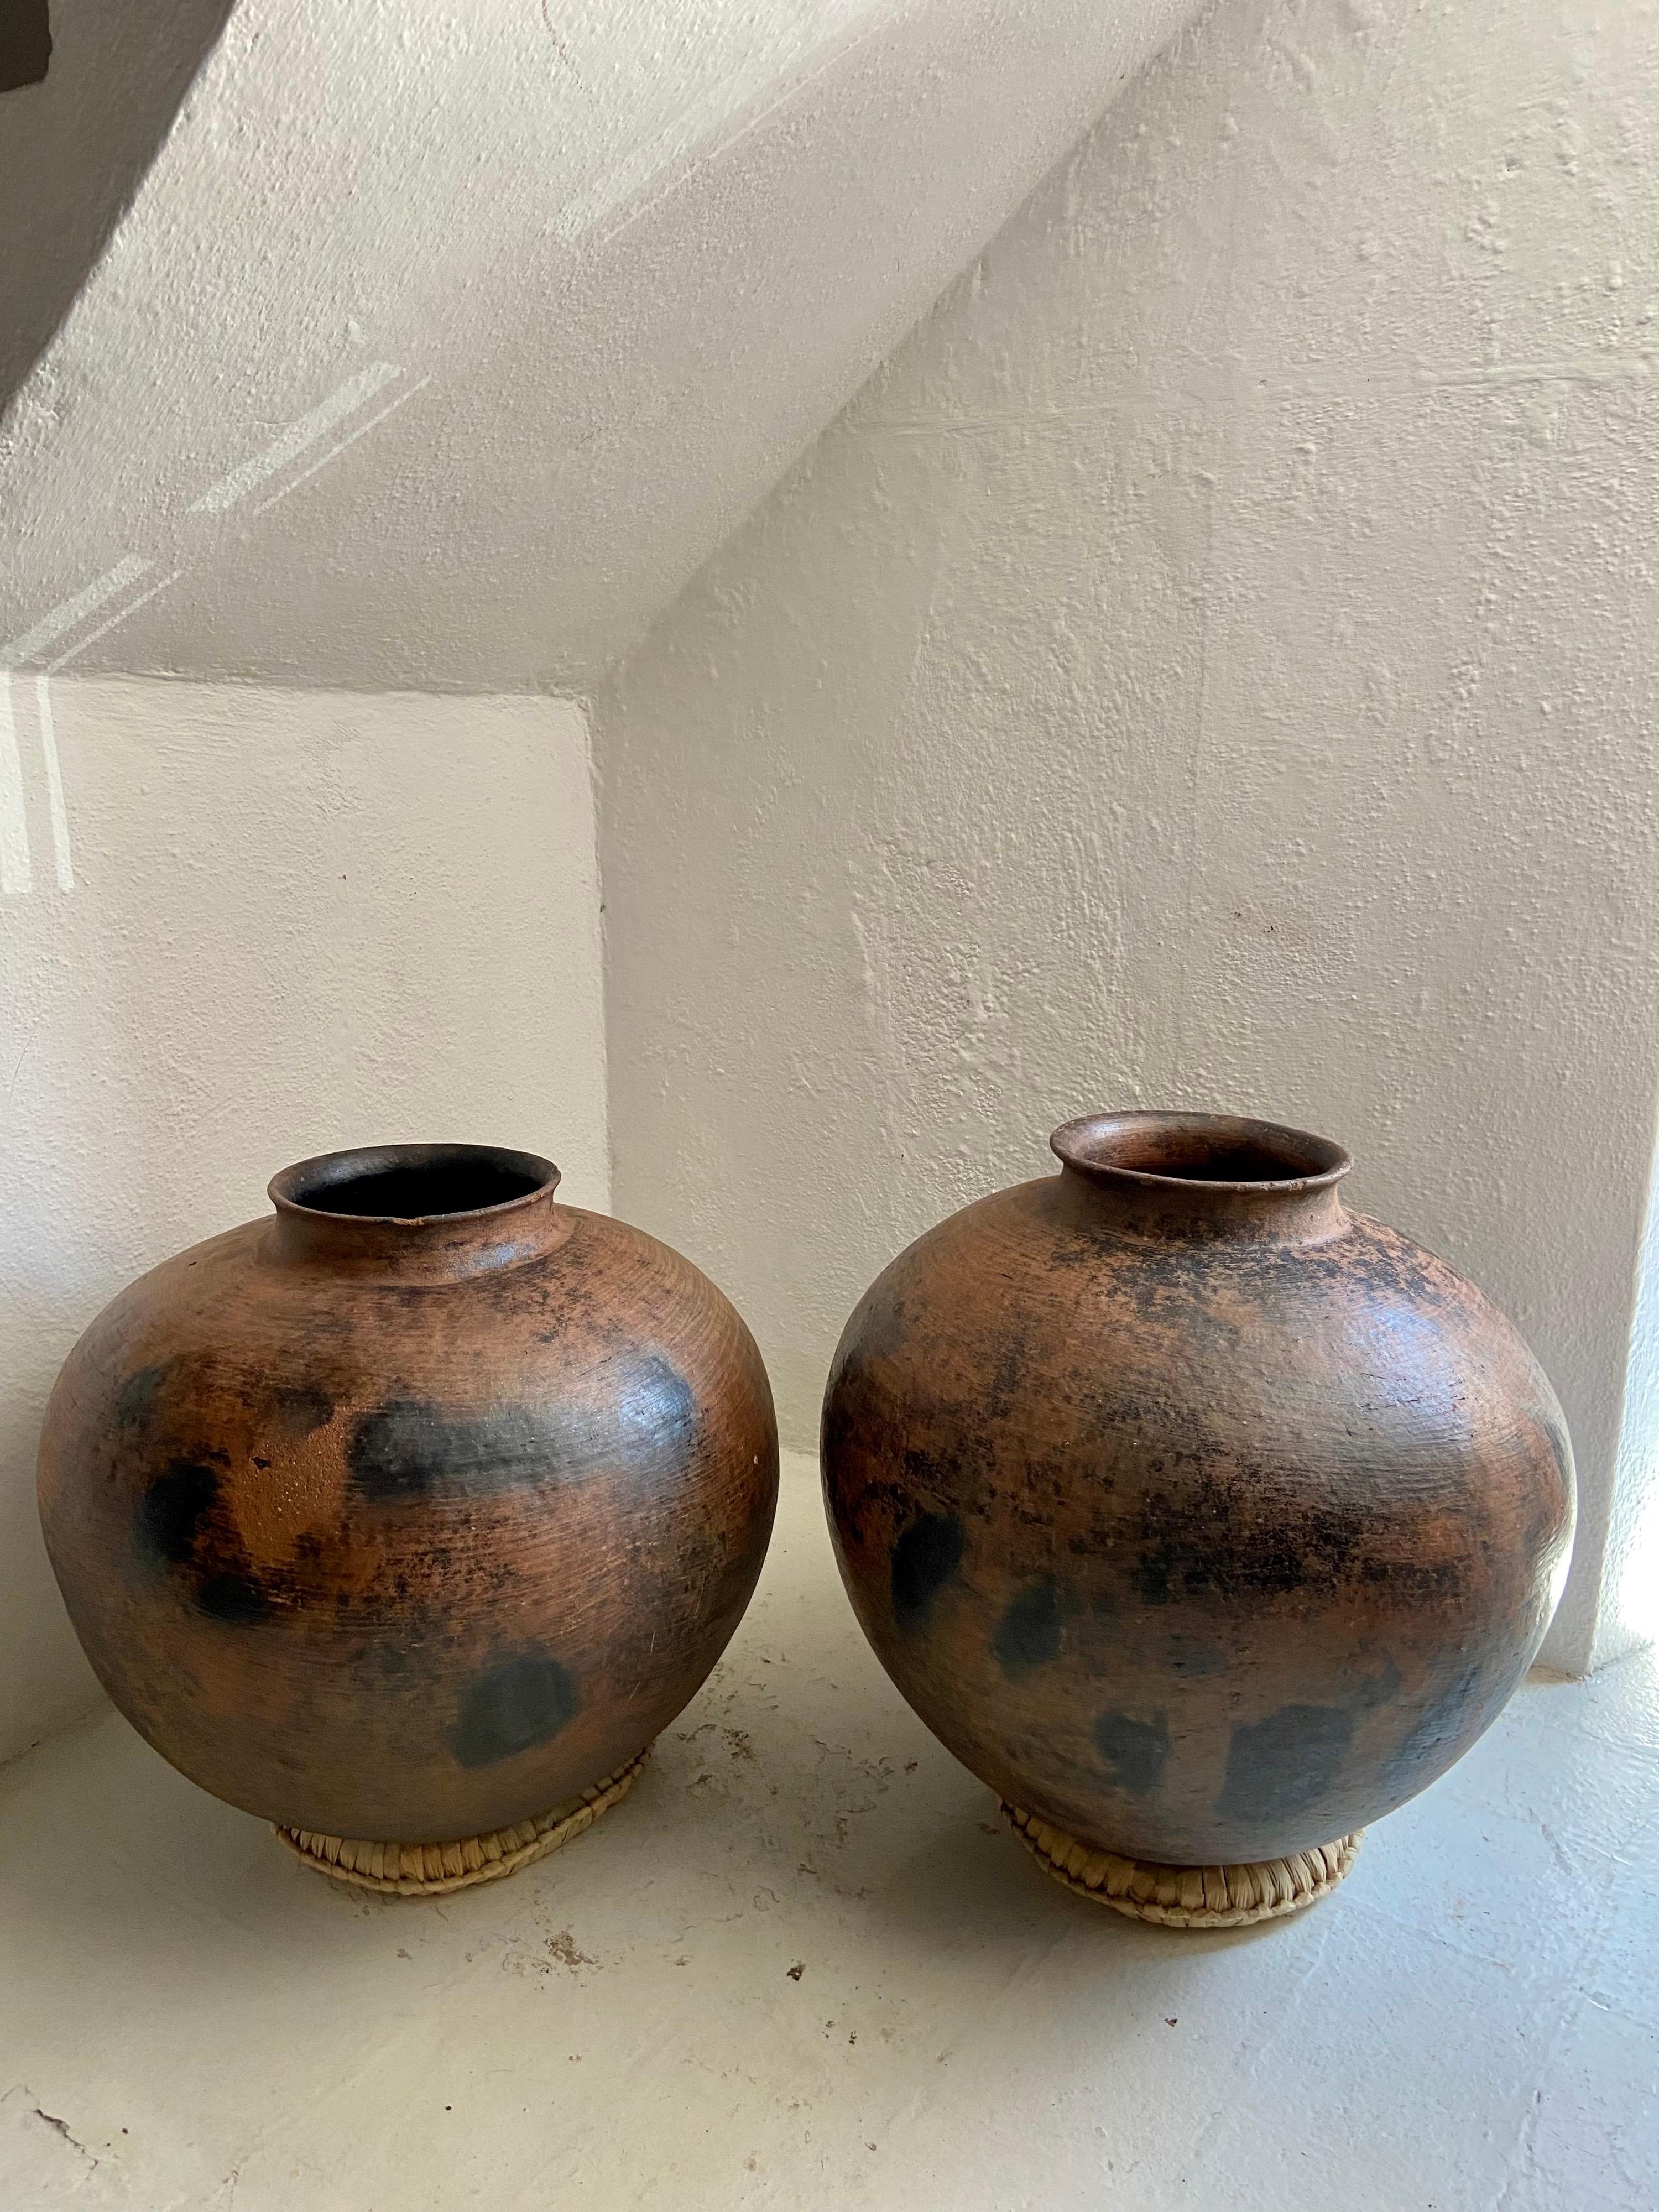 Set of two large water pots from the Mixteca Alta region of Oaxaca, Circa 1950's. Rare design from this region. Not a lot is known regarding their exact whereabouts. I have yet to see this style before.